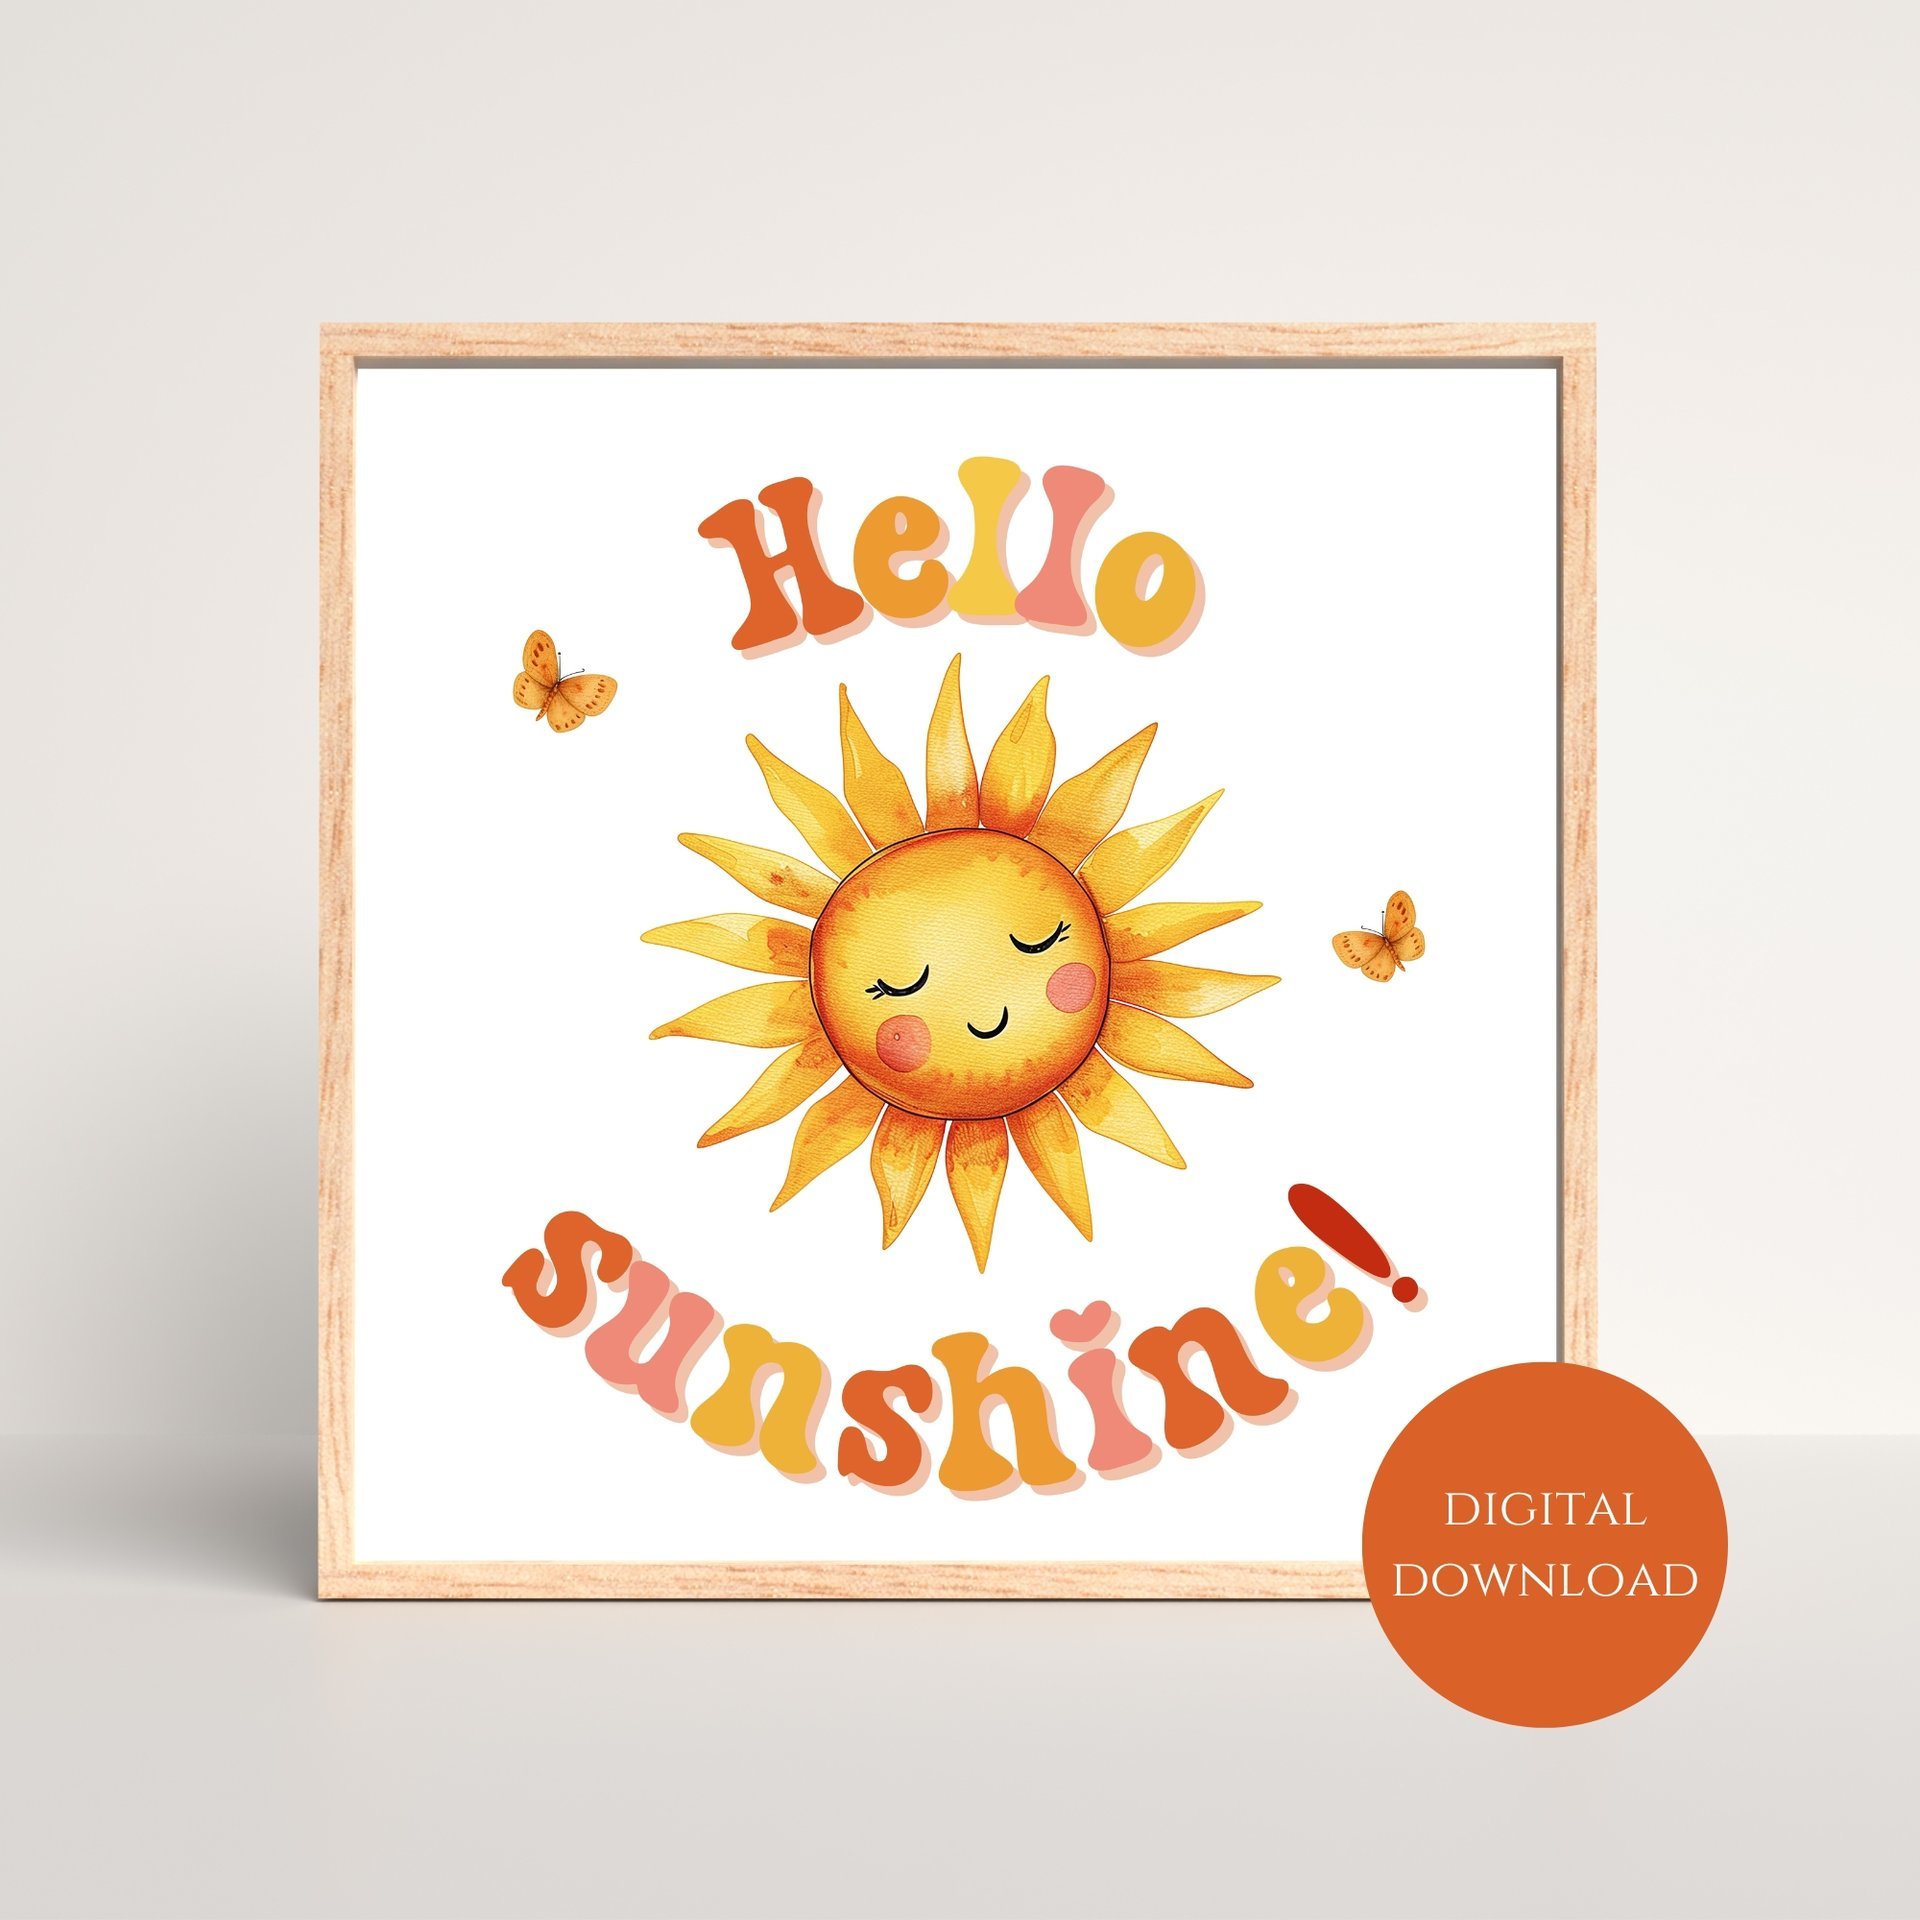 Hello Sunshine instant digital download wall art by The Tiny Tree Frog